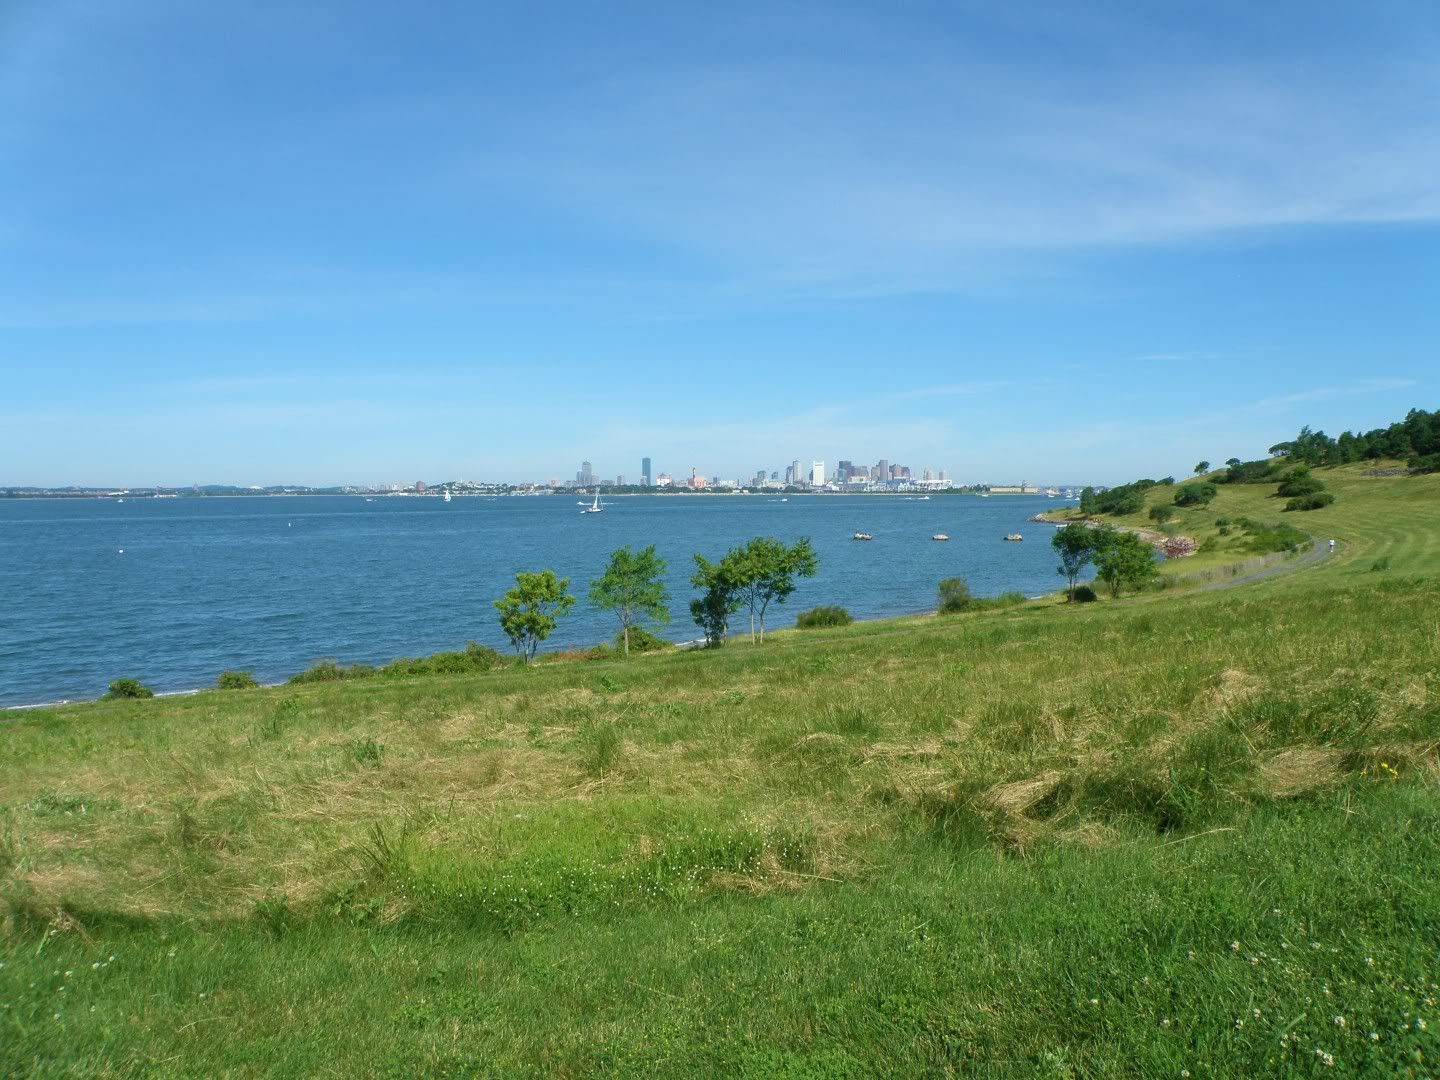 Arrived at Spectacle Island